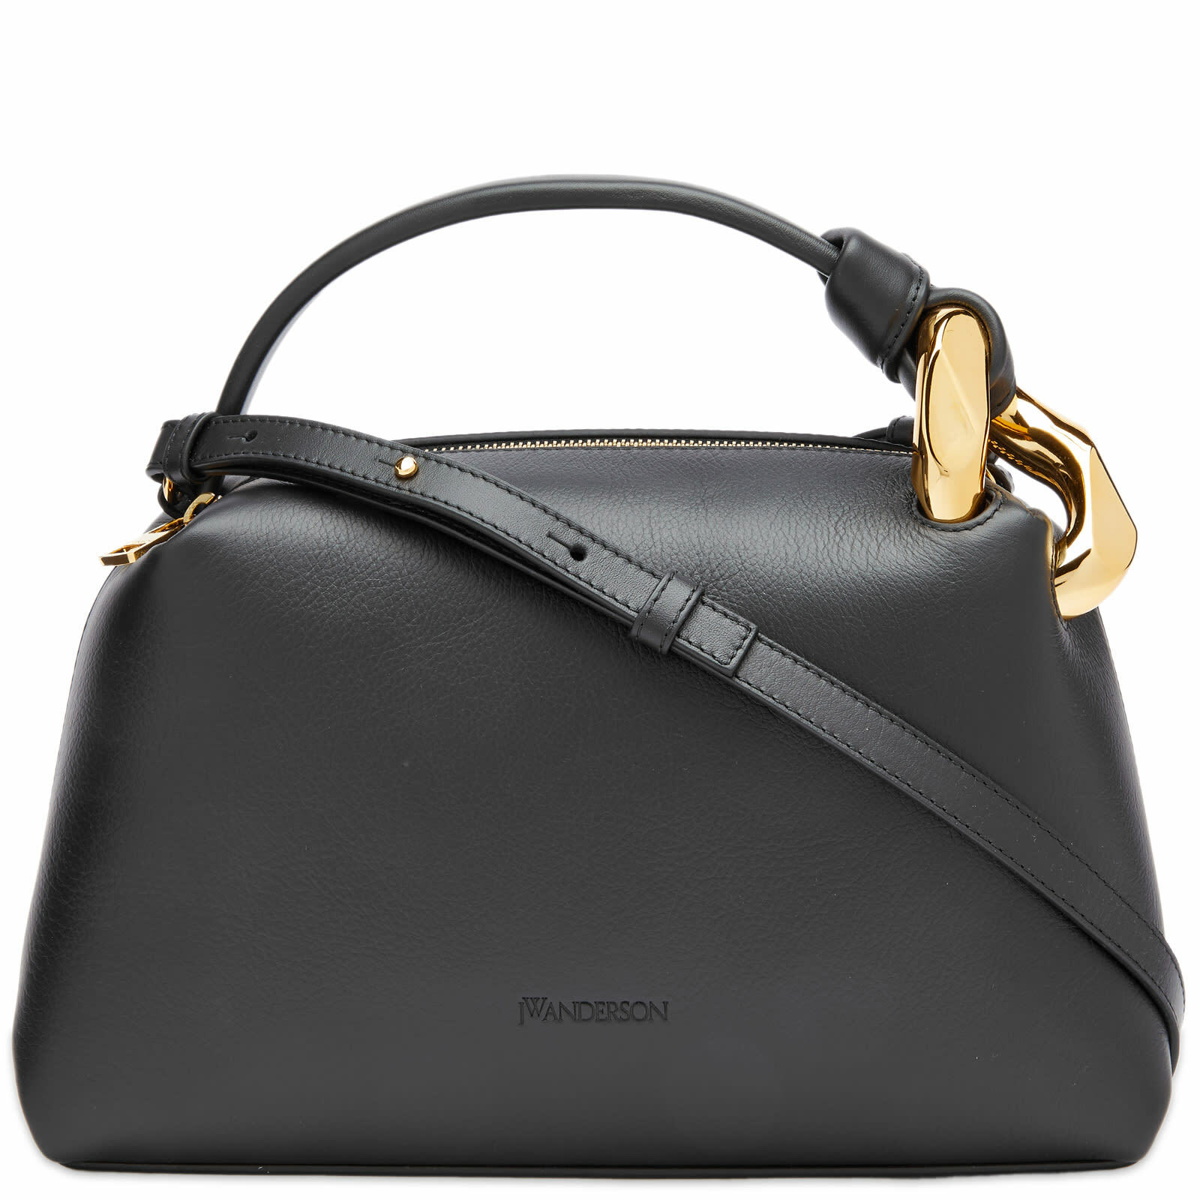 JW Anderson Women's The Chain Shoulder Bag in Black